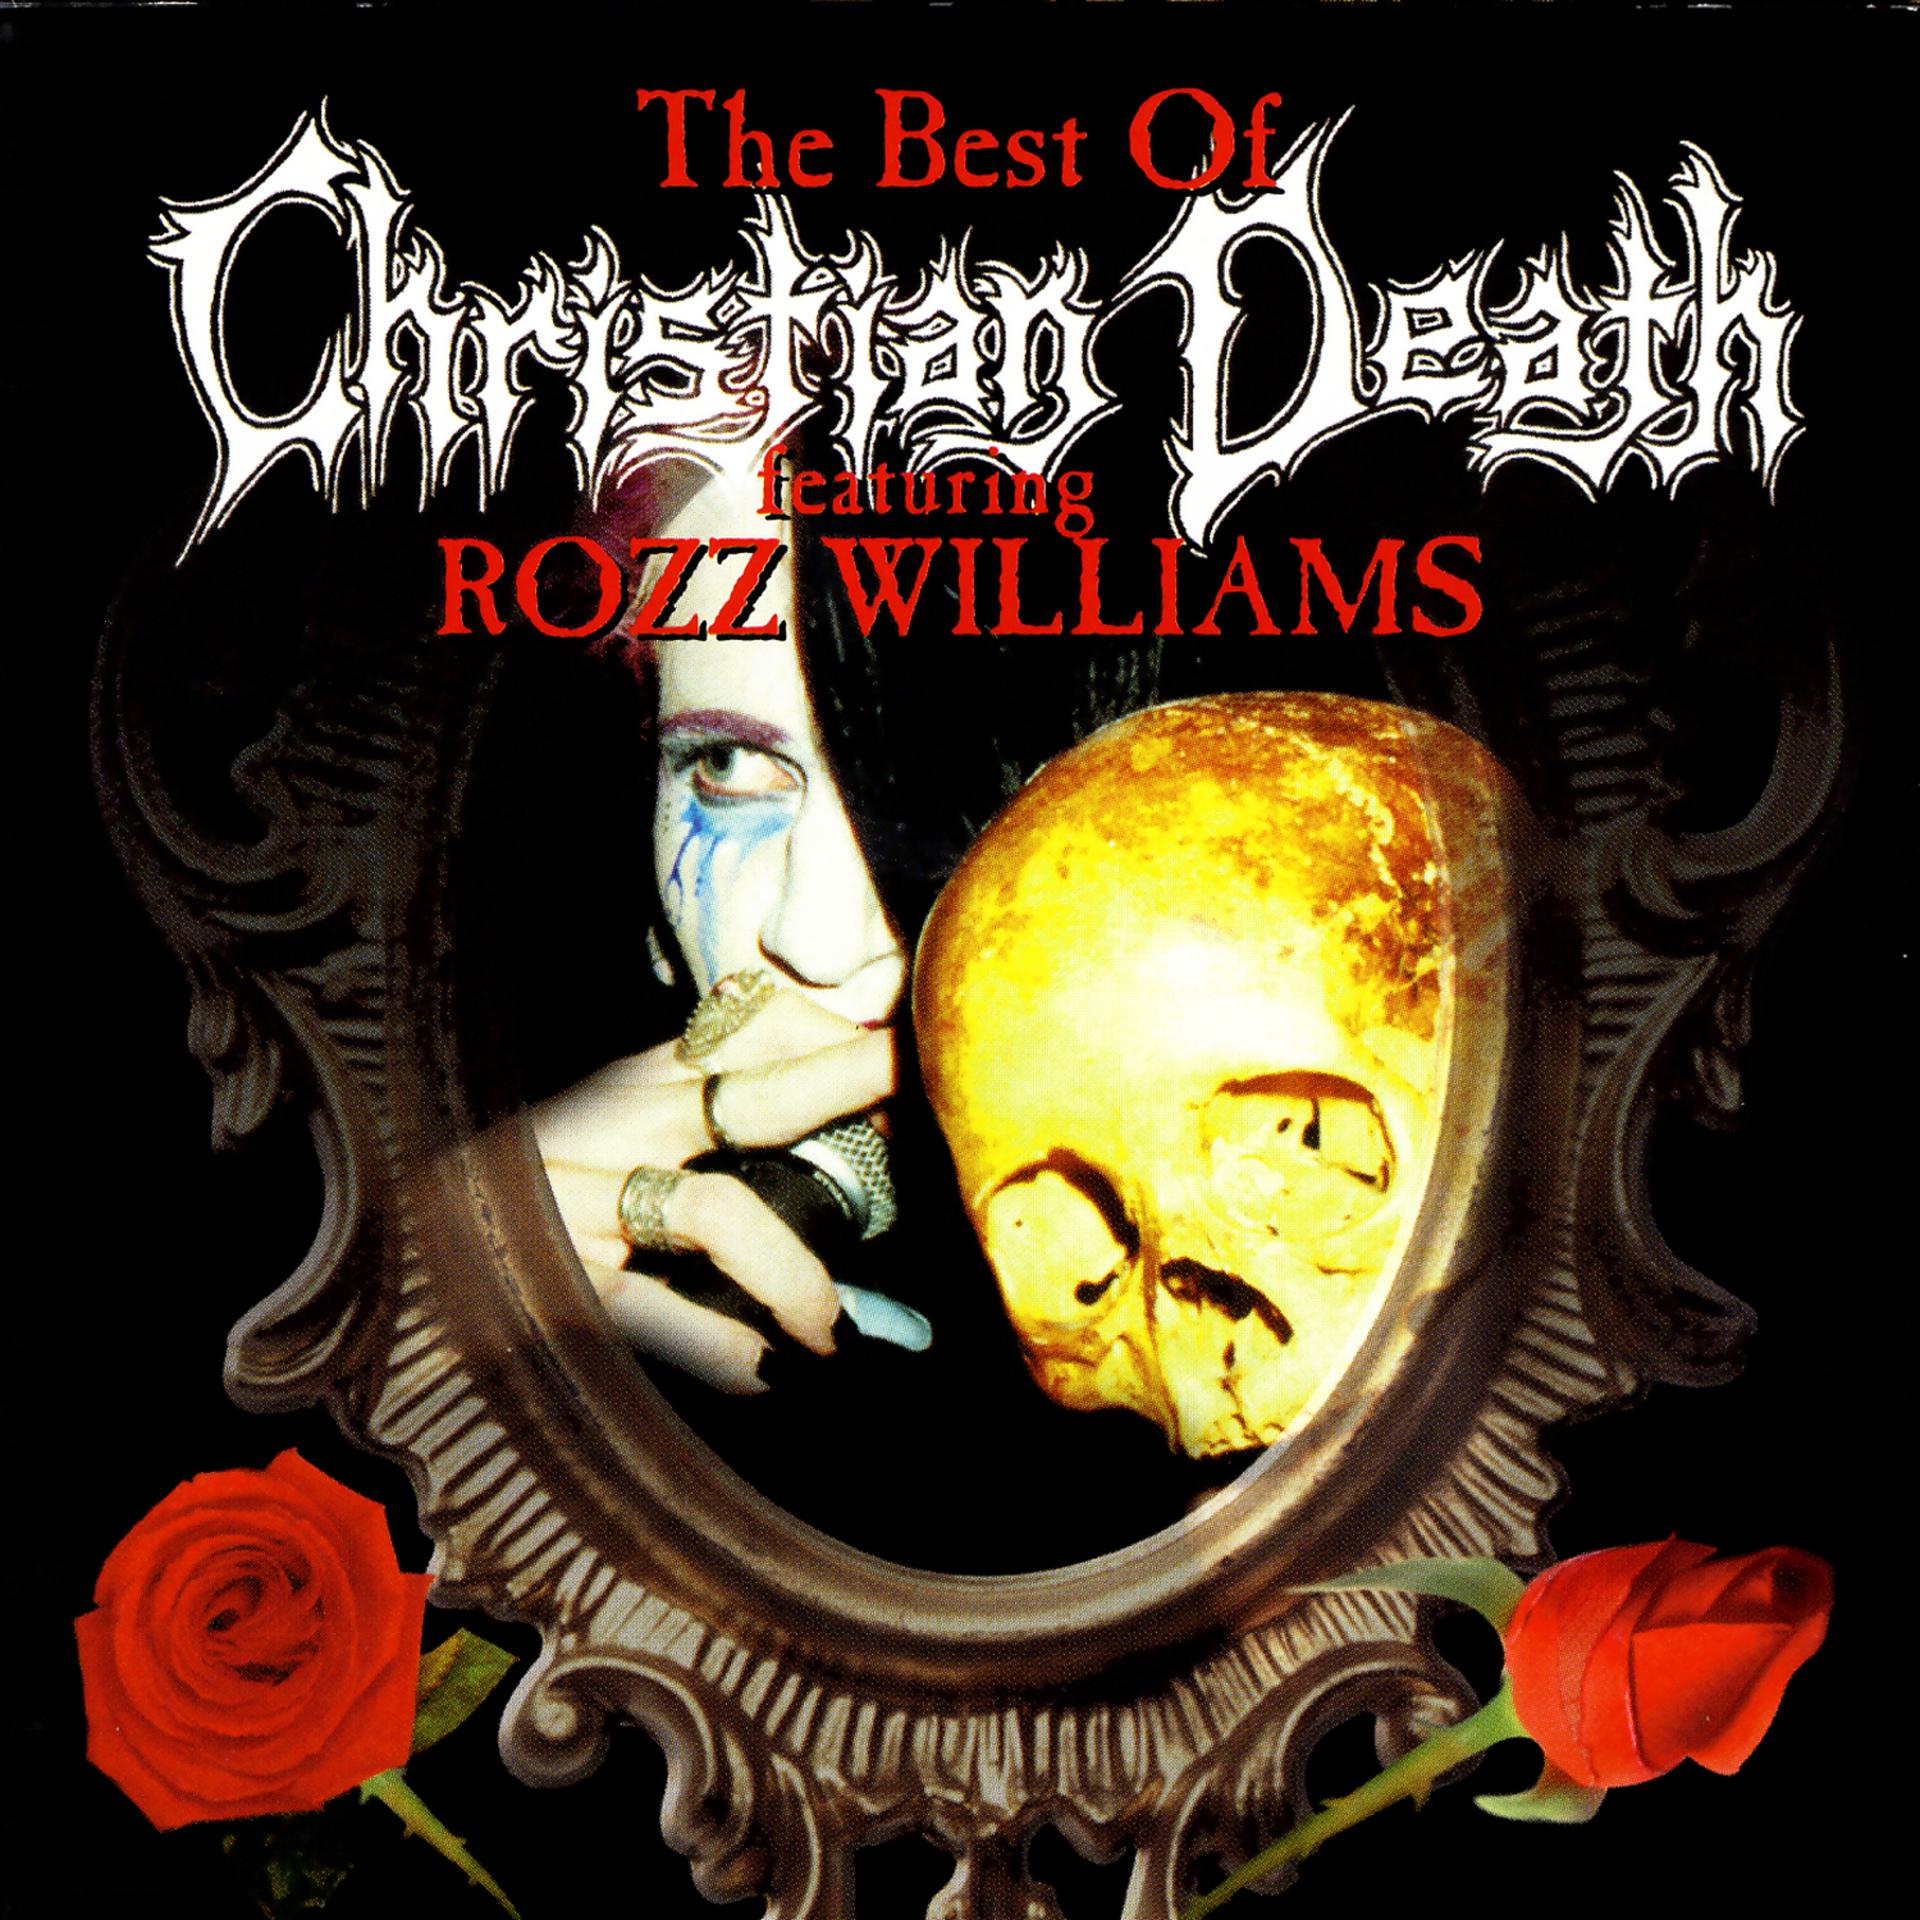 Постер альбома The Best Of Christian Death Featuring Rozz Williams